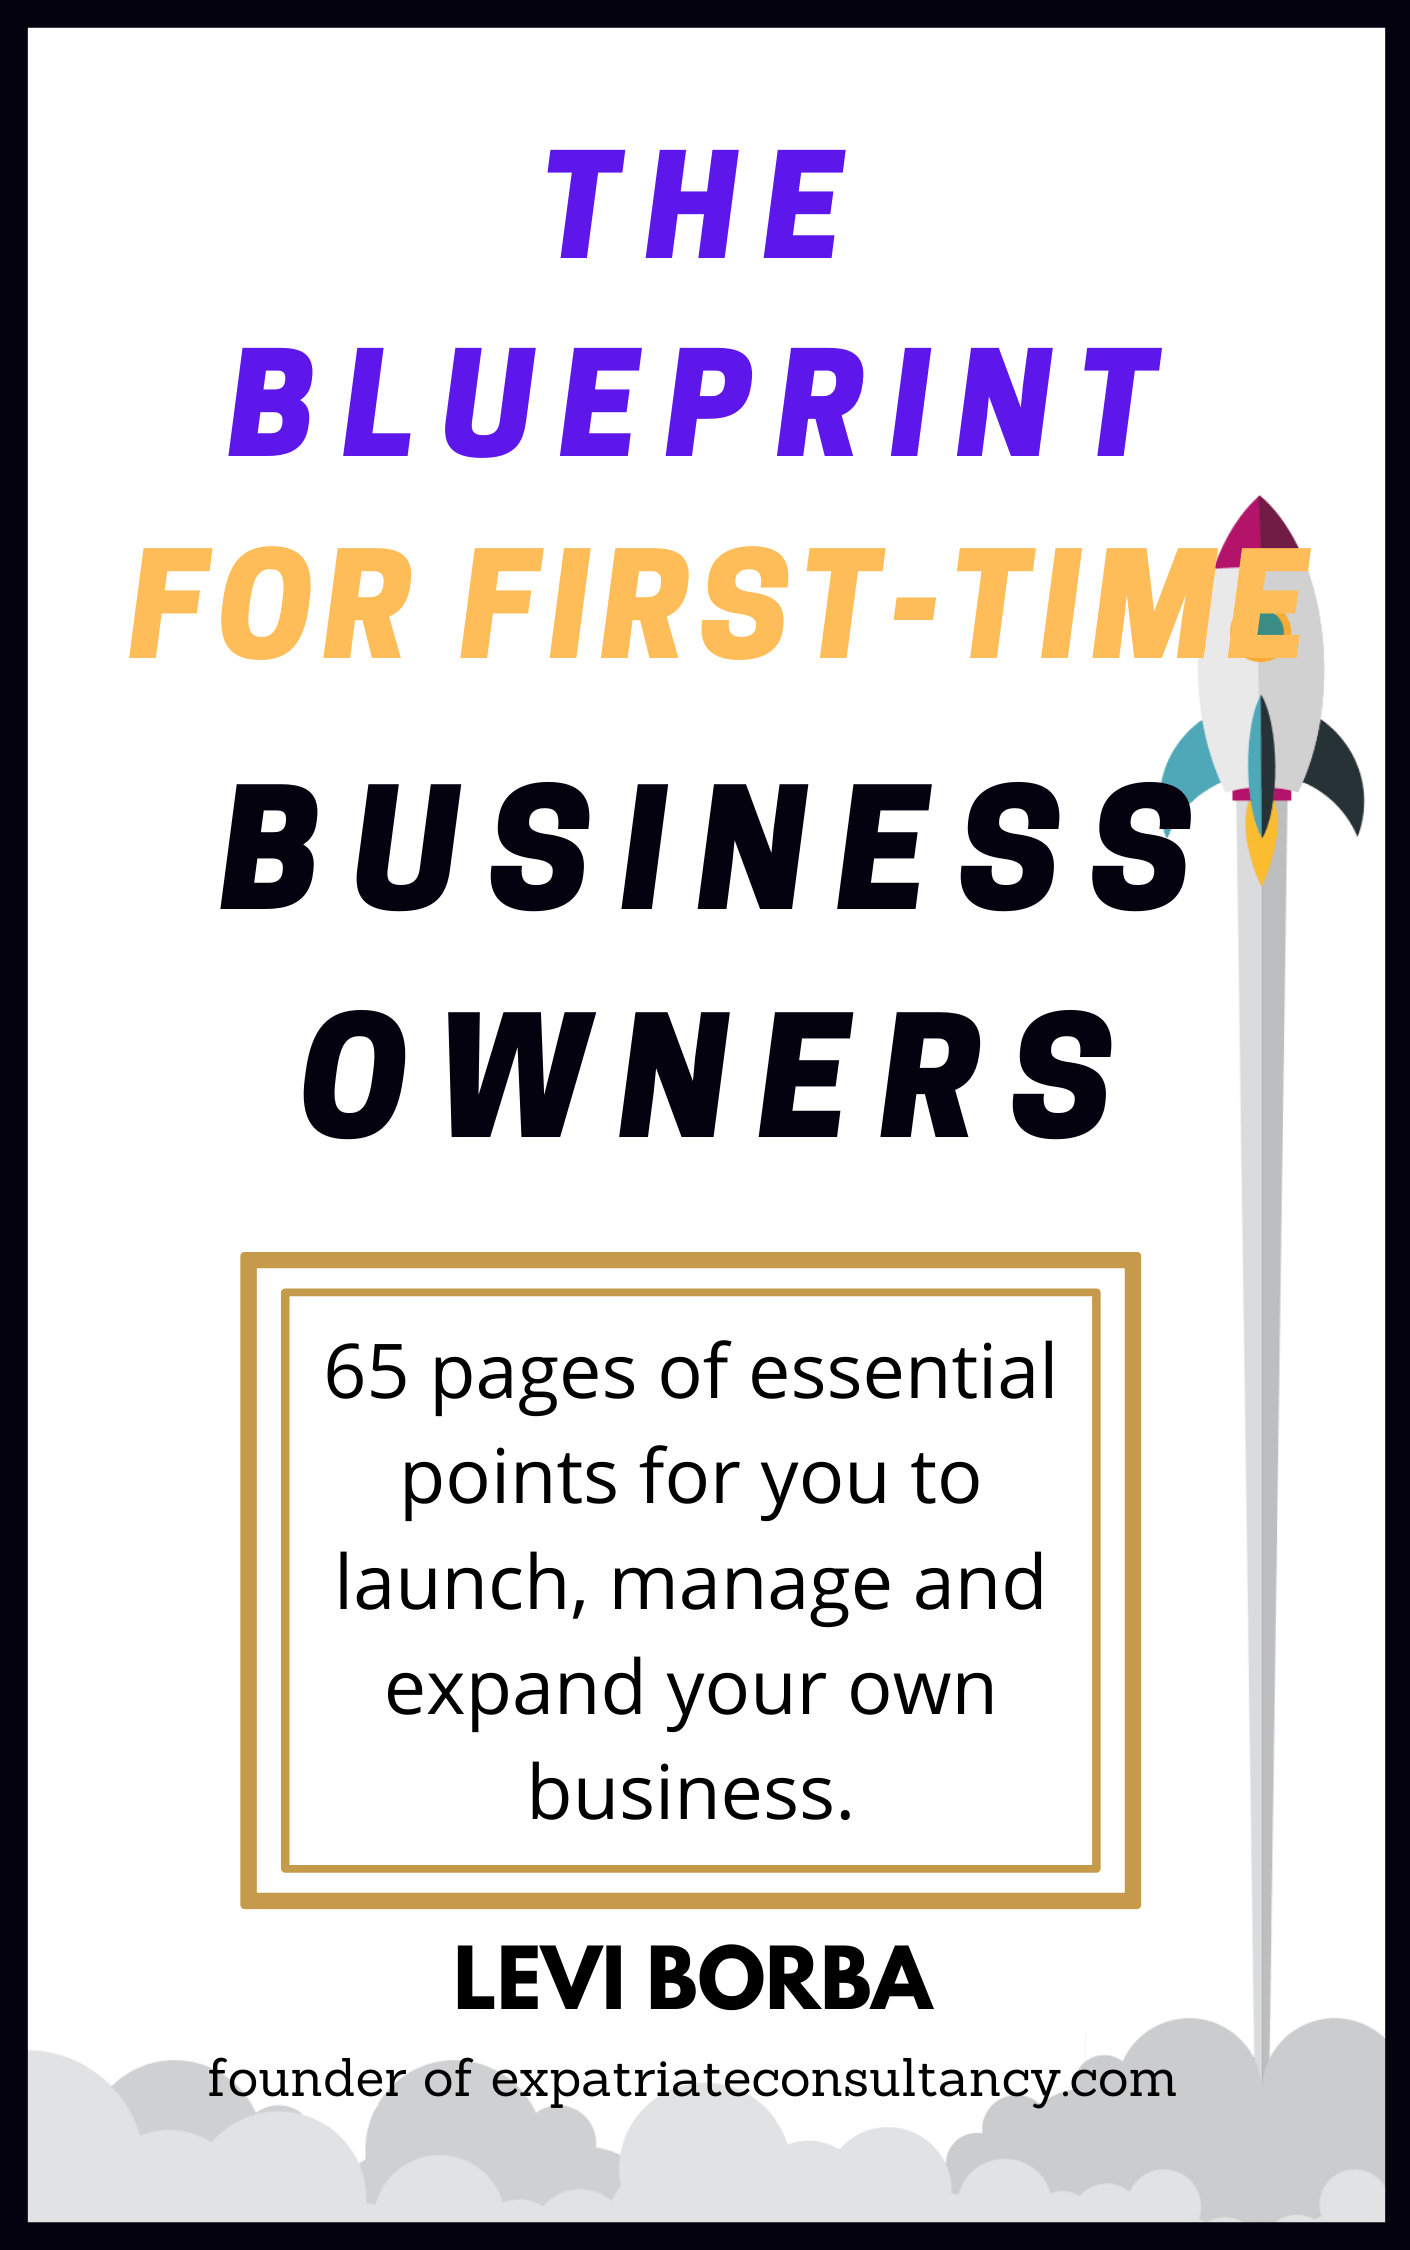 Blueprint for first-time business owners